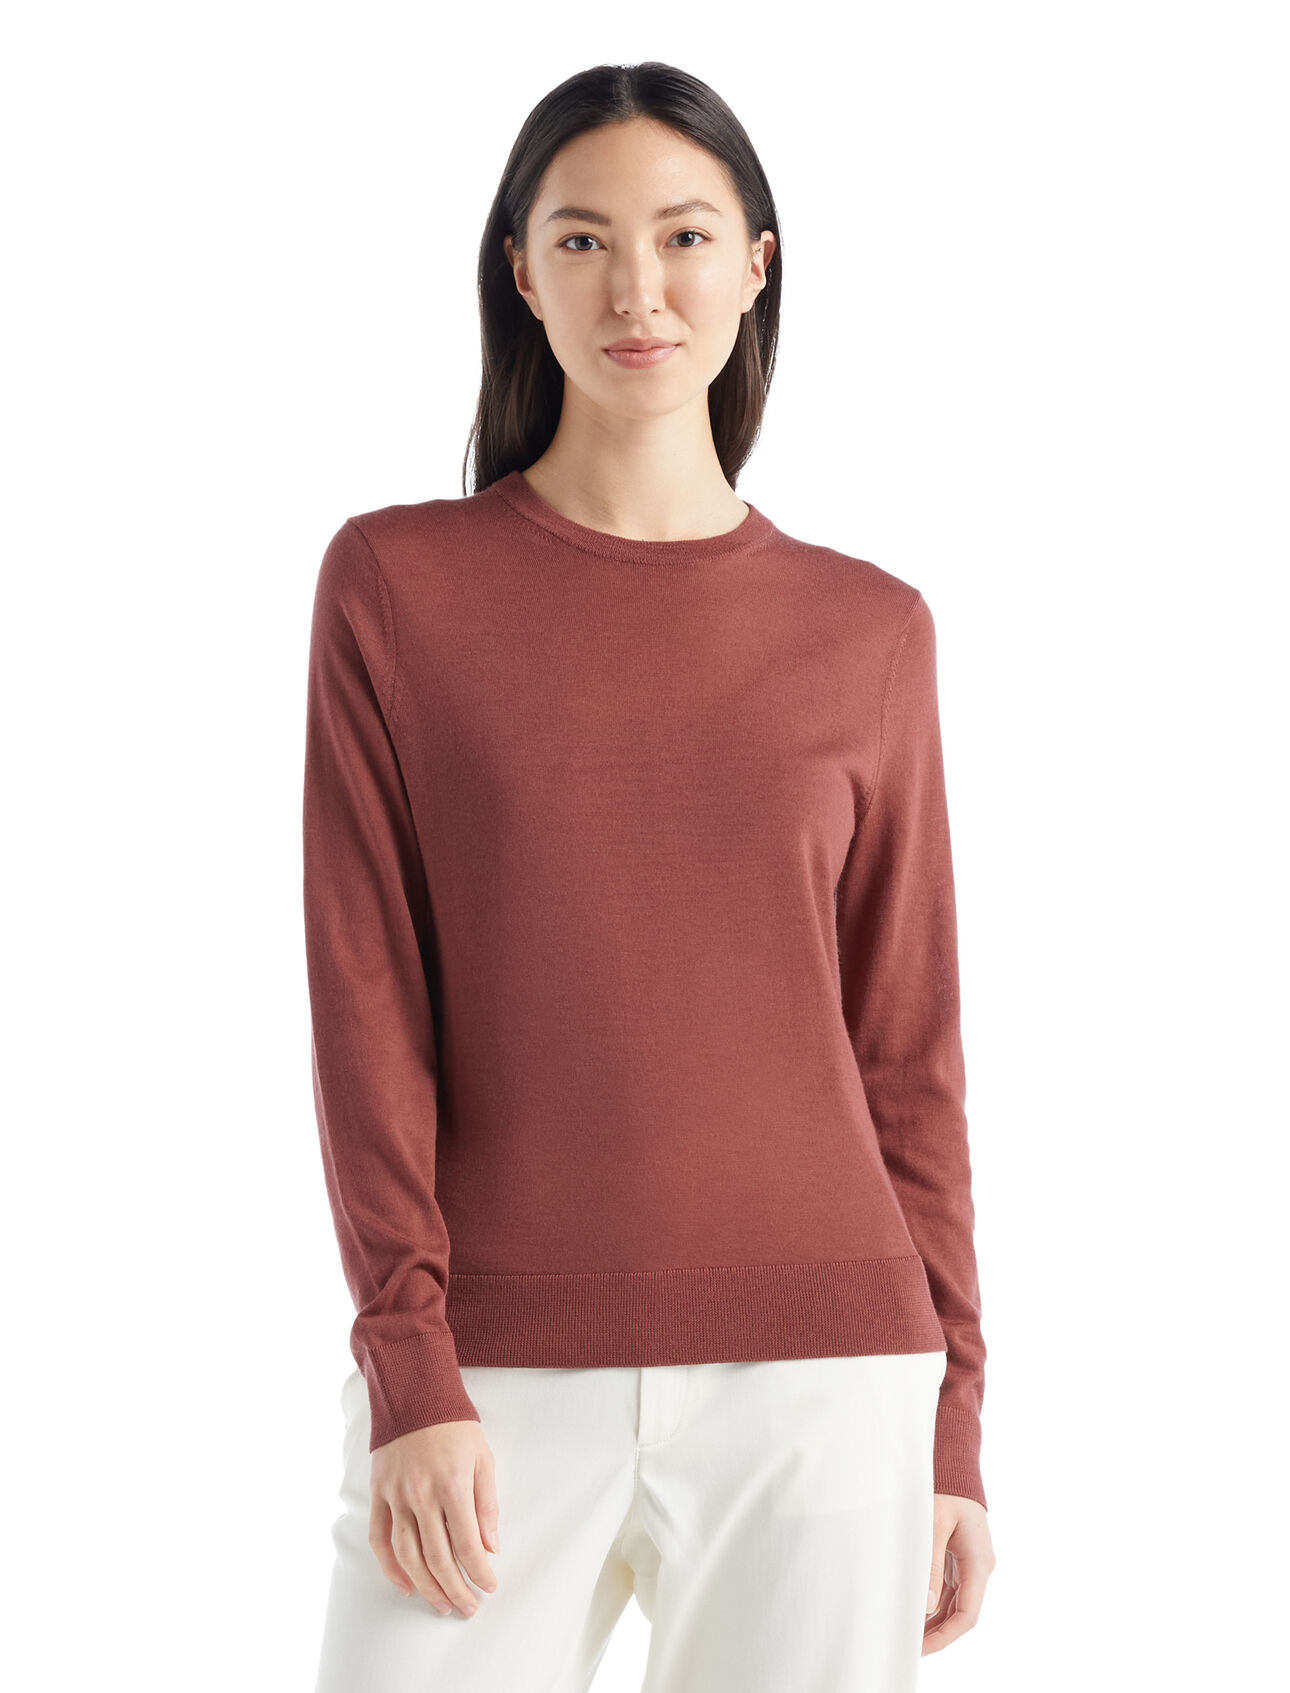 Womens Merino Wilcox Long Sleeve Sweater A classic everyday sweater made with ultra-fine gauge merino wool for unparalleled softness, the Wilcox Long Sleeve Sweater is perfect for days when you need a light extra layer.